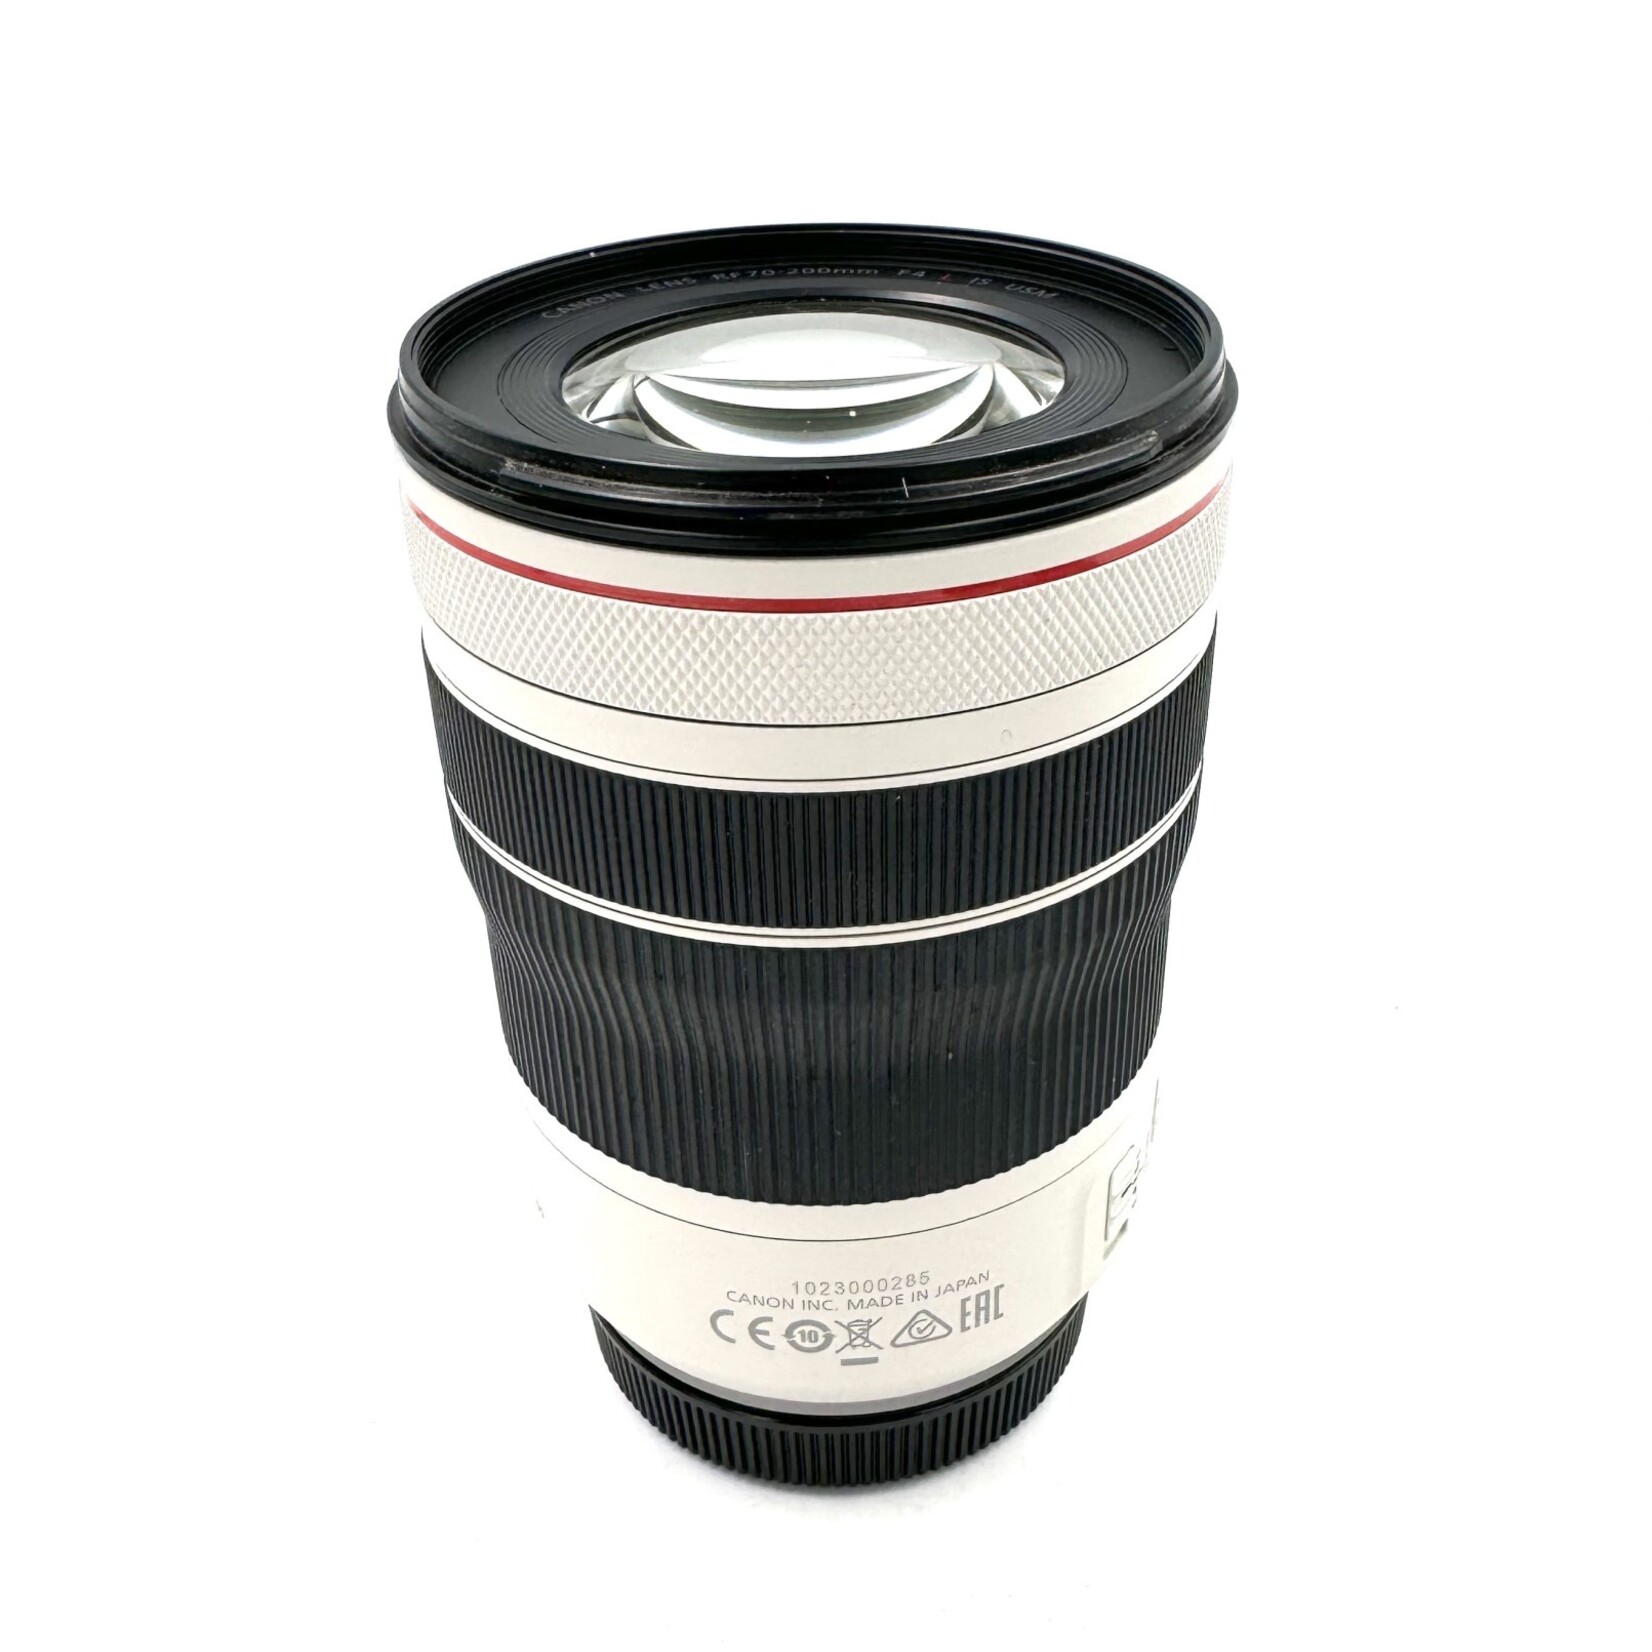 Canon Used Canon 70-200mm f/4 L for RF